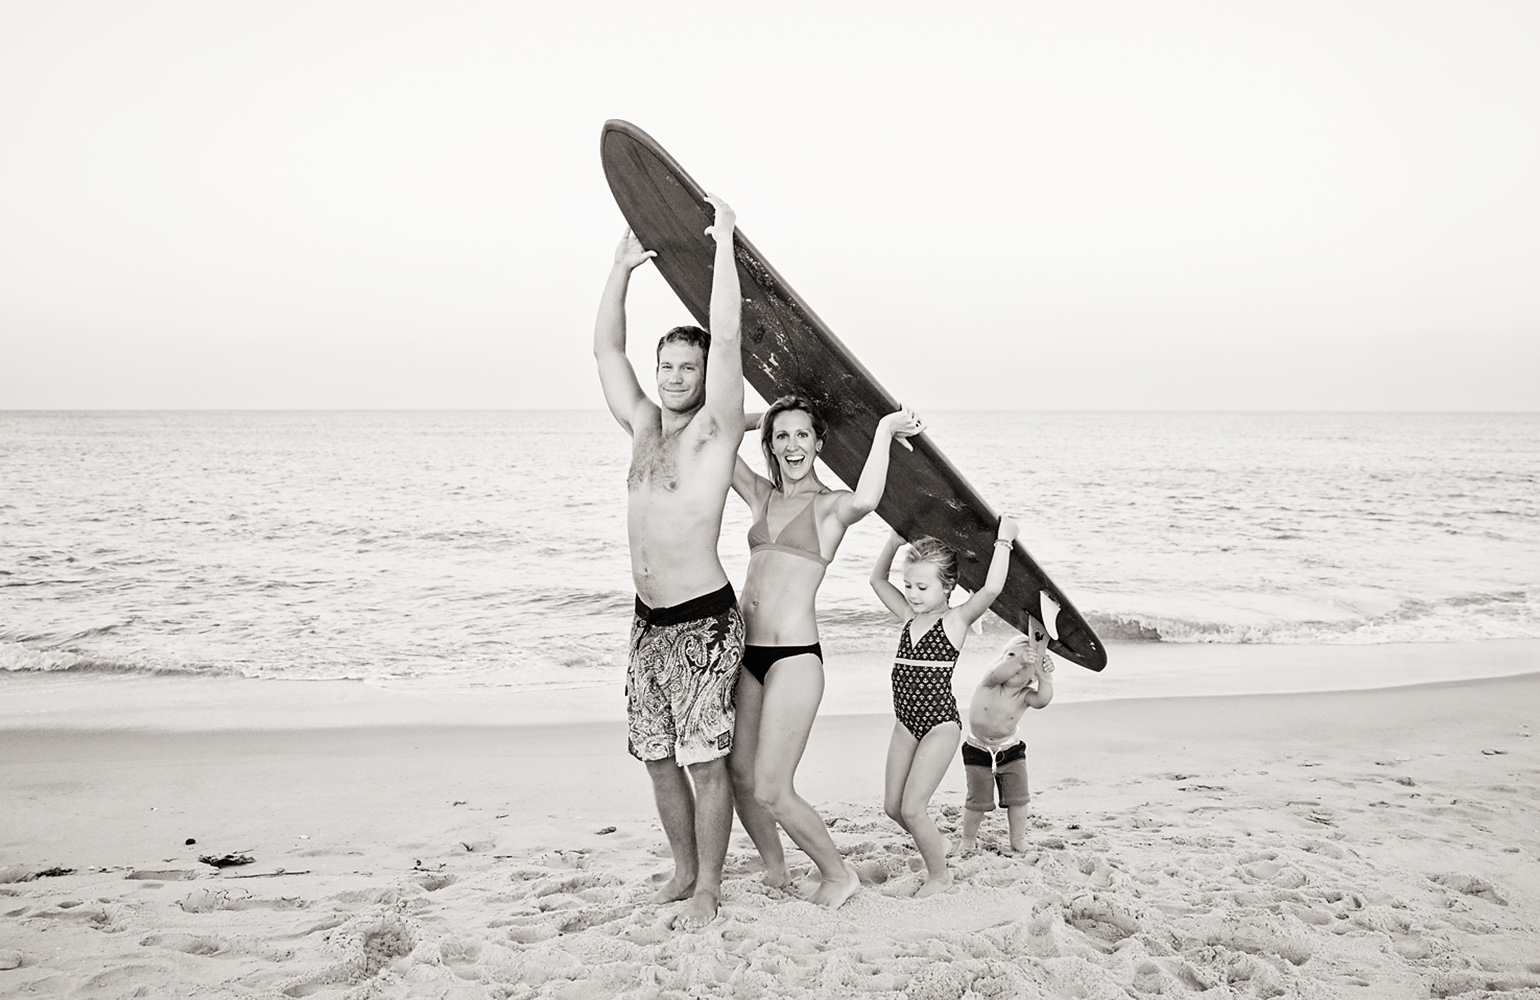 Local Outer Banks family holding up a surfboard